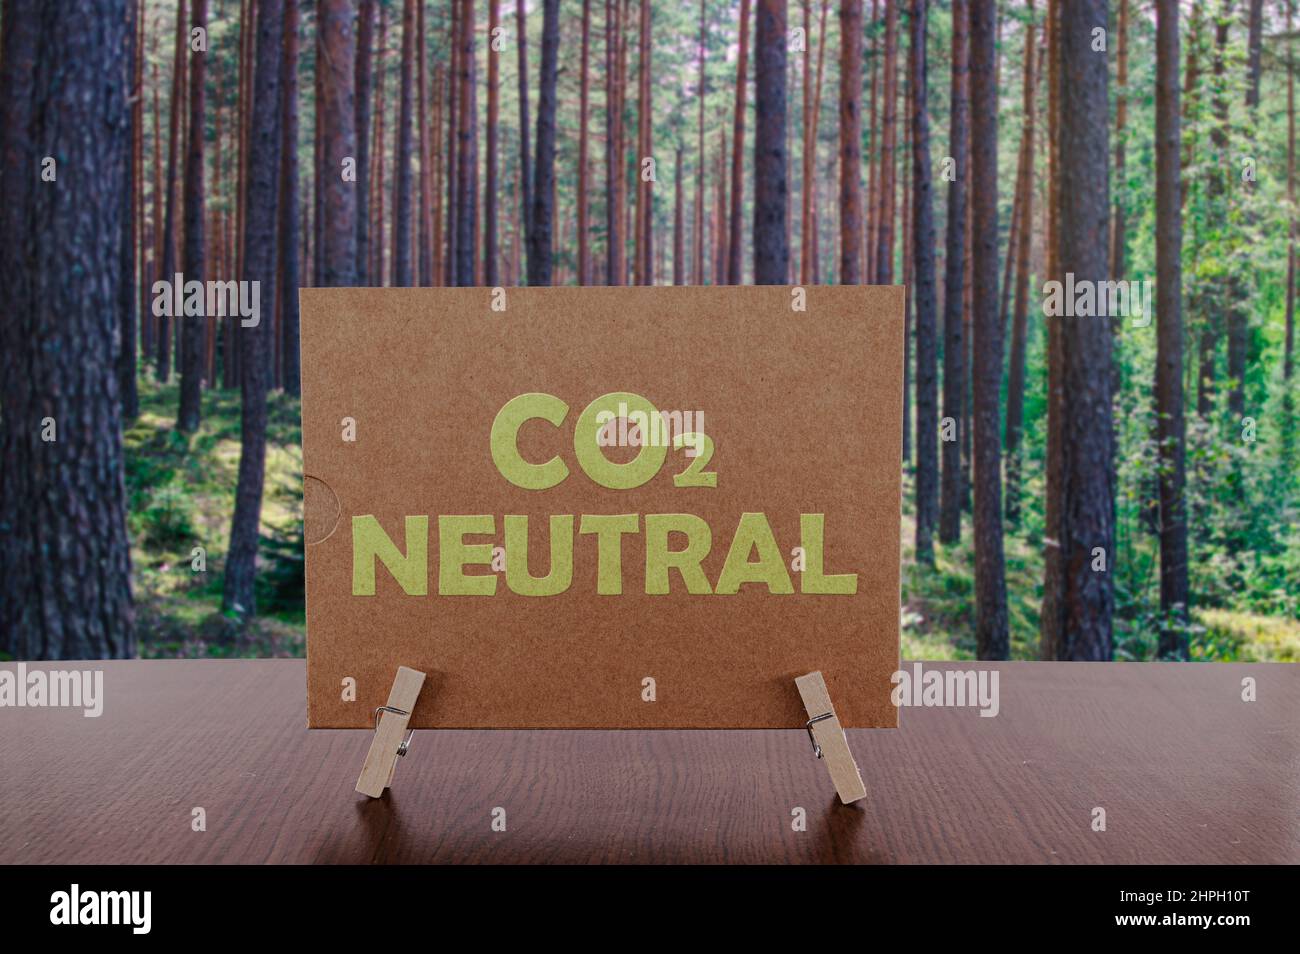 CO2 Neutral text on card on the table with pine forest background. Stock Photo